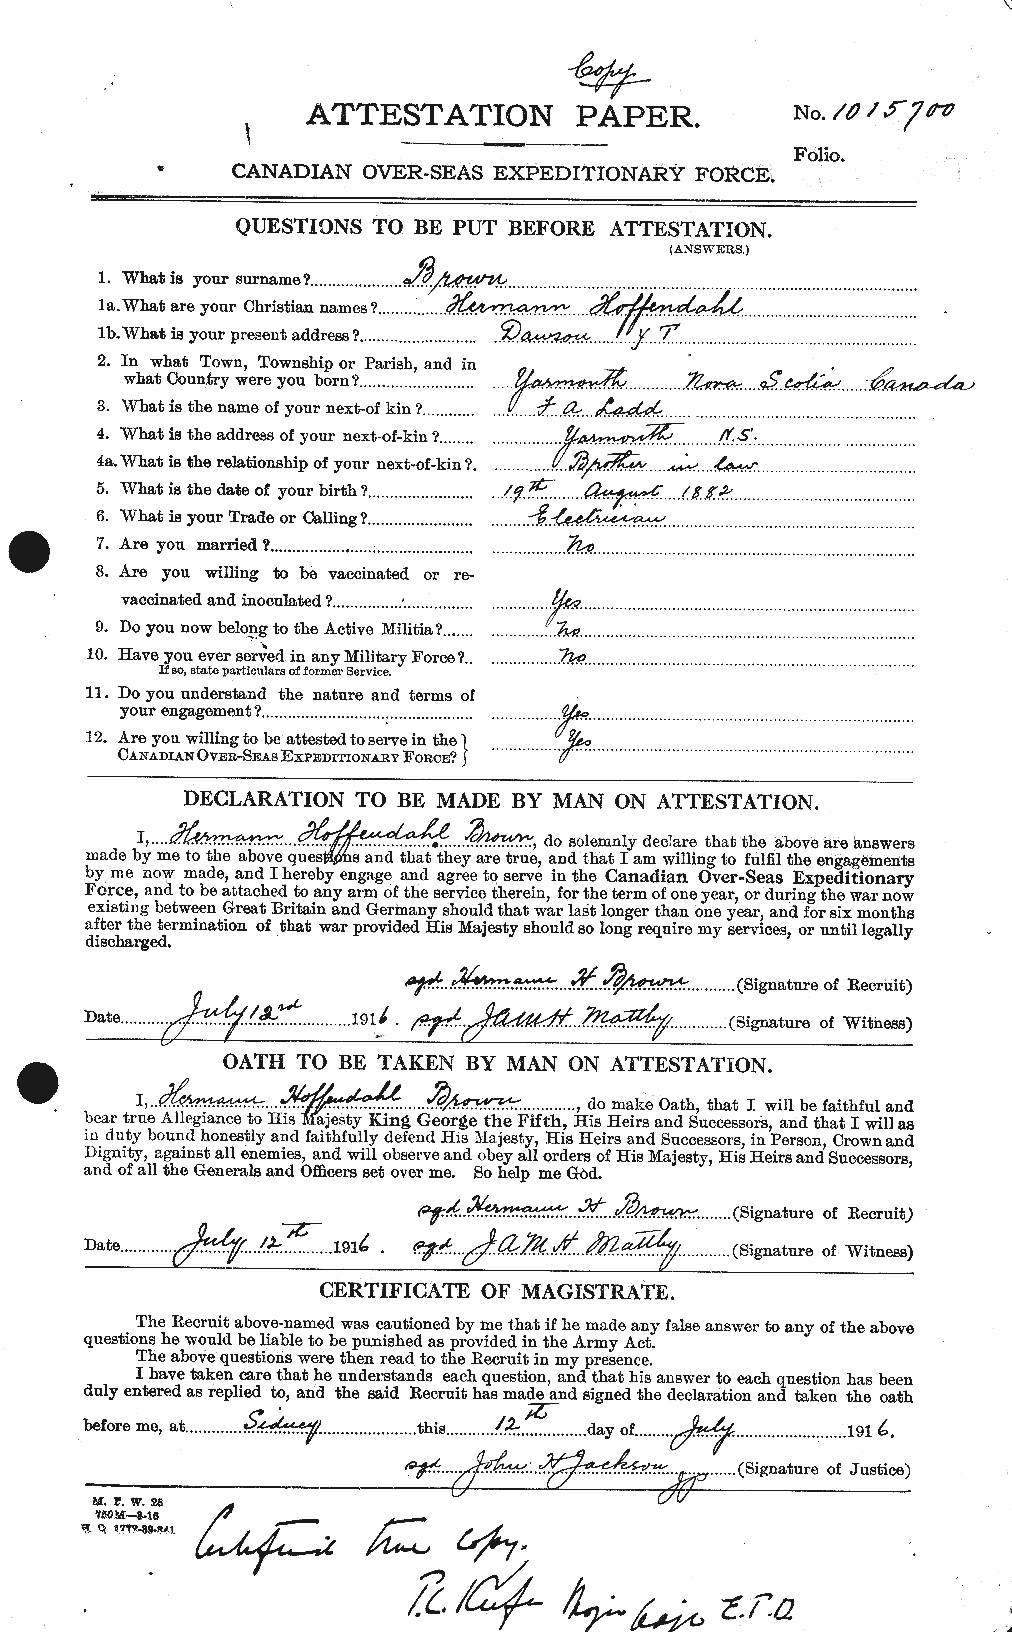 Personnel Records of the First World War - CEF 265598a